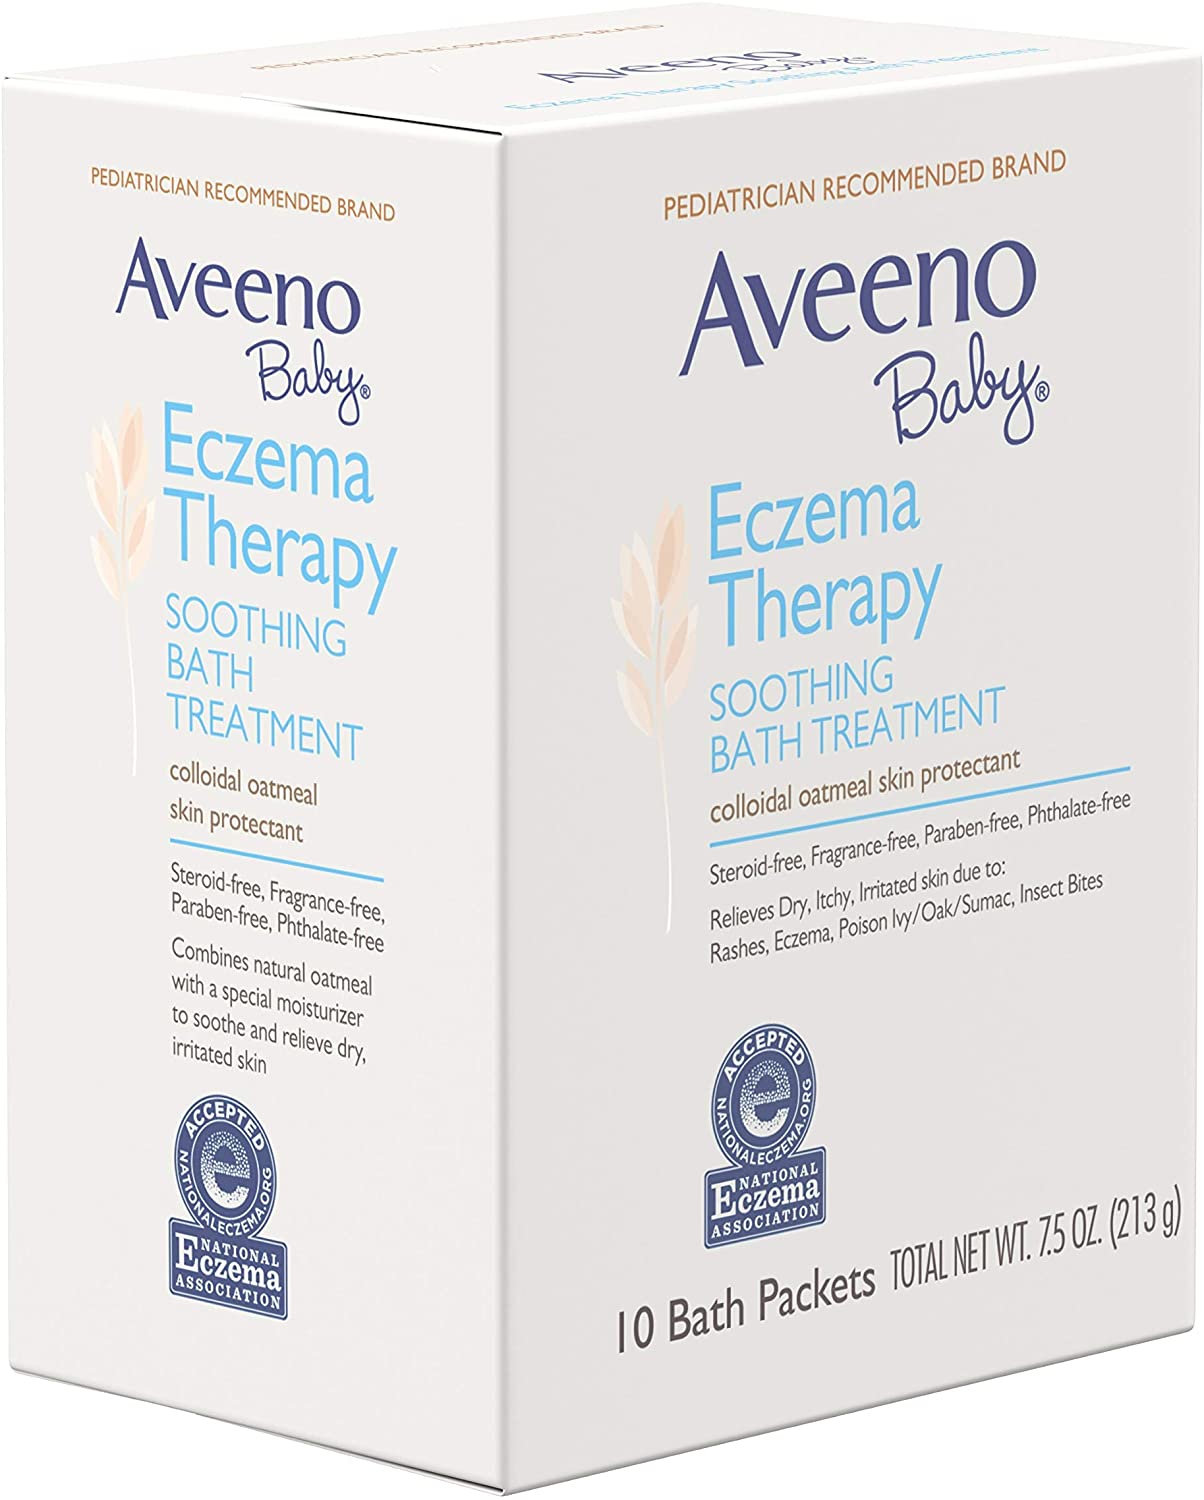 Aveeno Baby Eczema Therapy Soothing Bath Treatment with Natural Oatmeal, 10 ct.